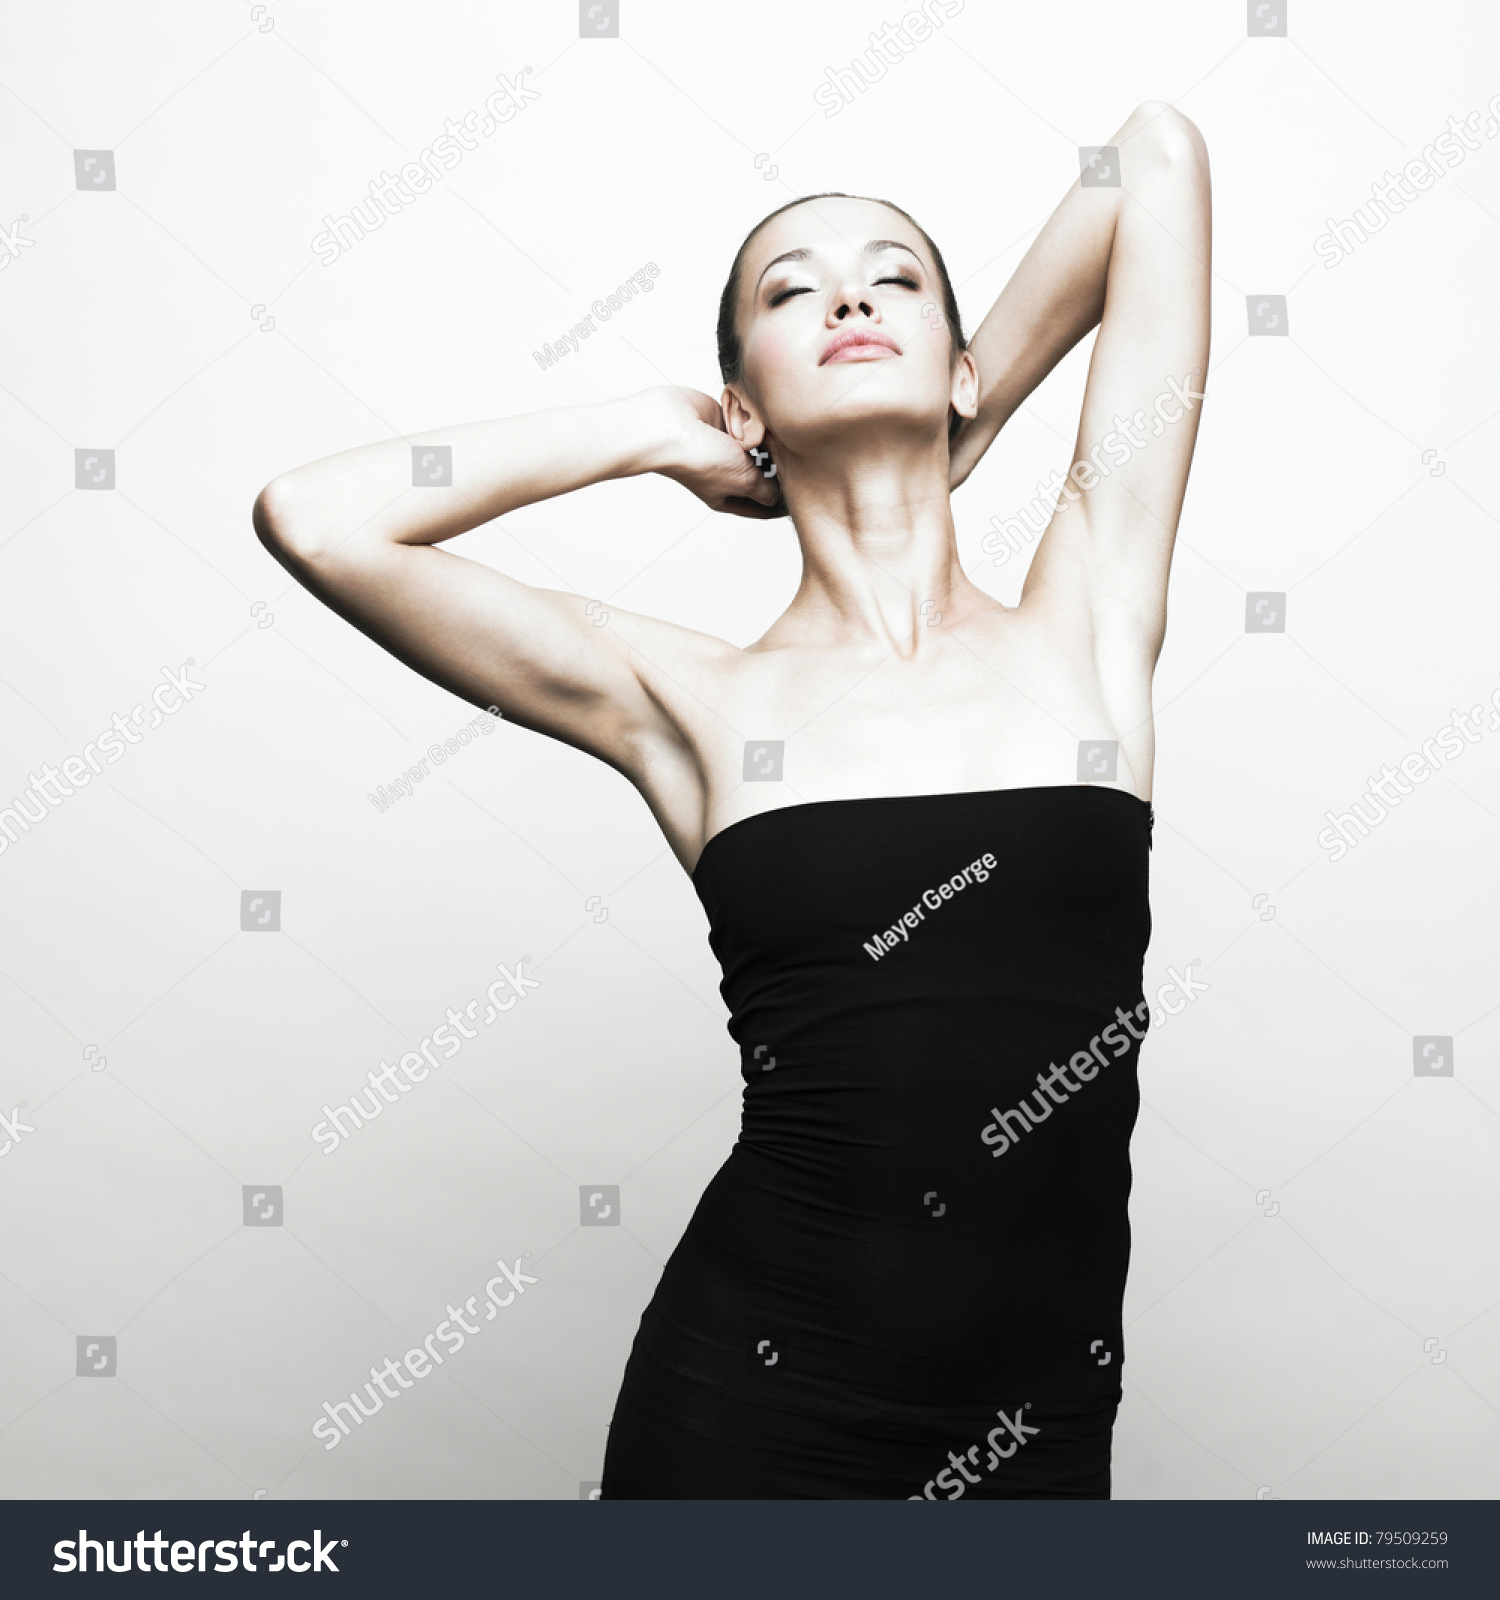 Portrait Young Girl Black Dress Stock Photo (Royalty Free) 79509259 ...